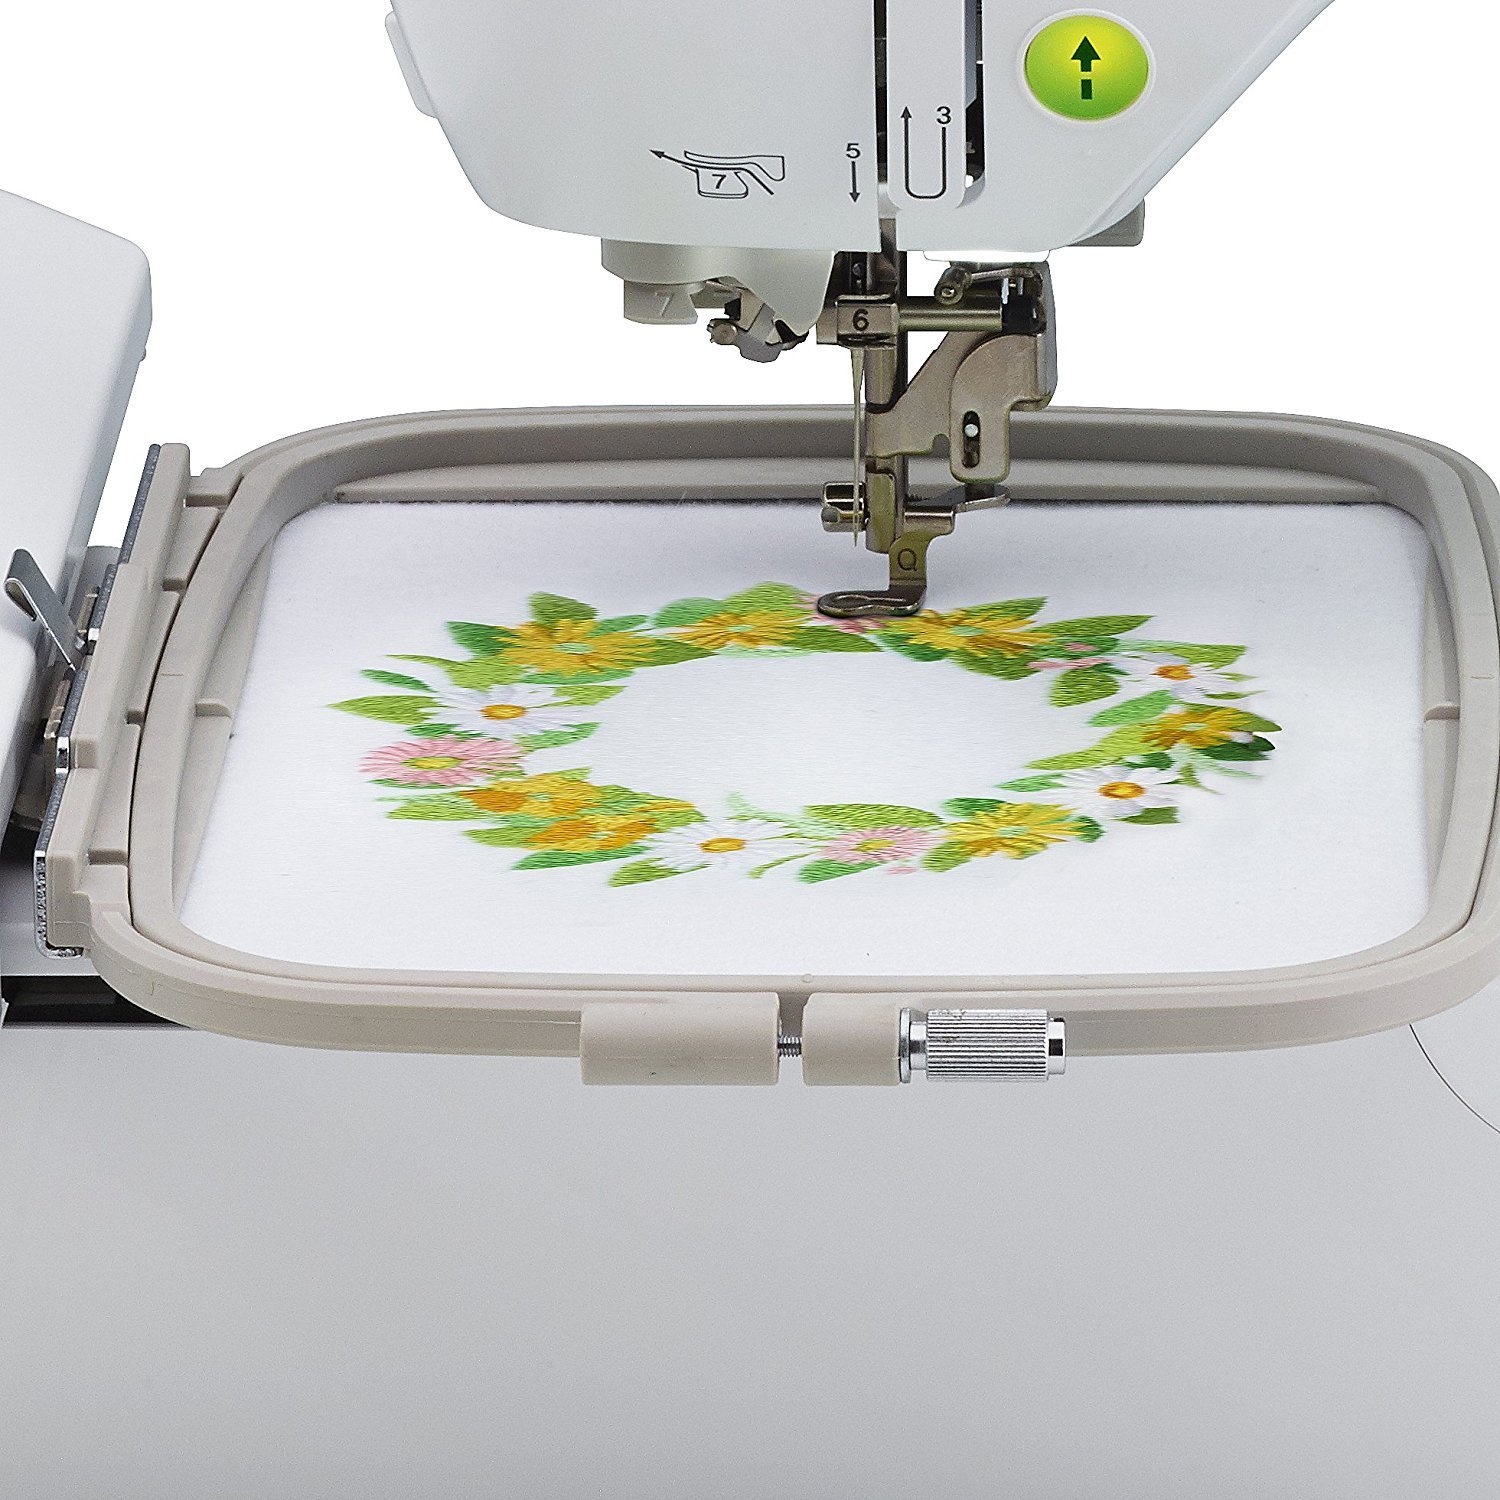 Brother PE900 5x7 Embroidery Field - FREE Shipping over $49.99